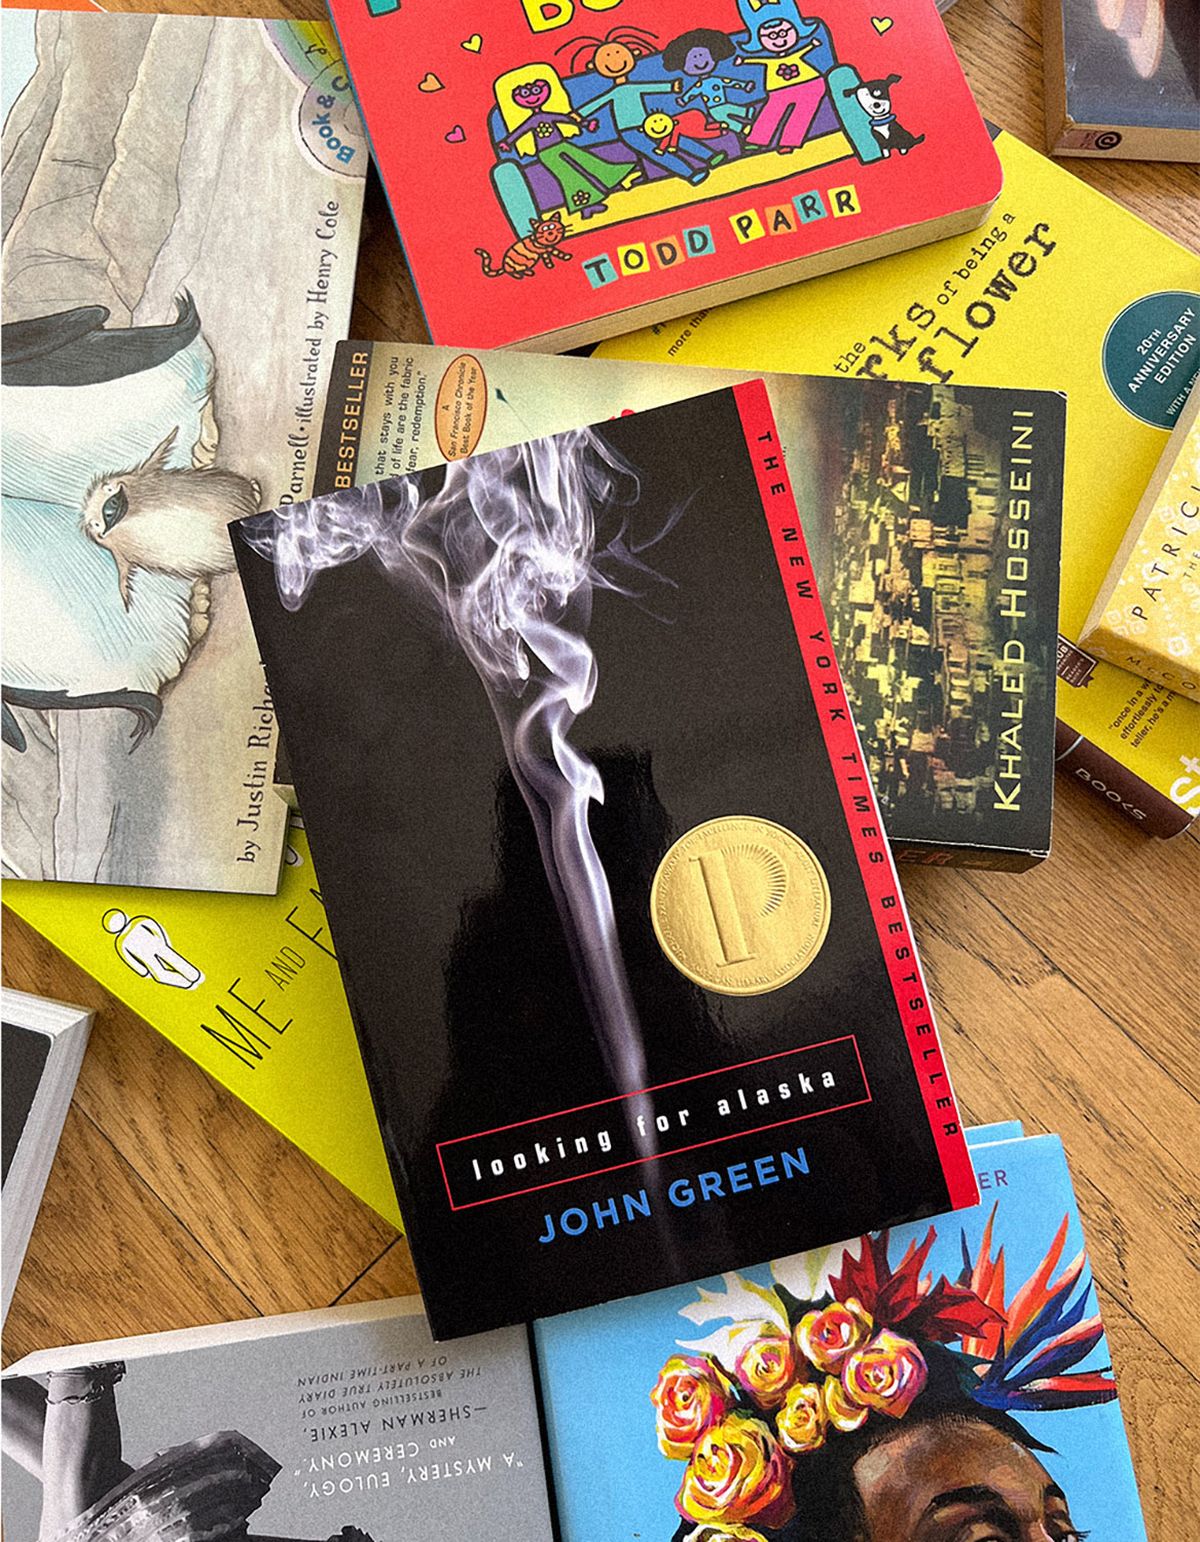 "Looking for Alaska" by John Greeen was the third most frequently banned book in U.S. schools.    (PEN AMERICA/TNS)